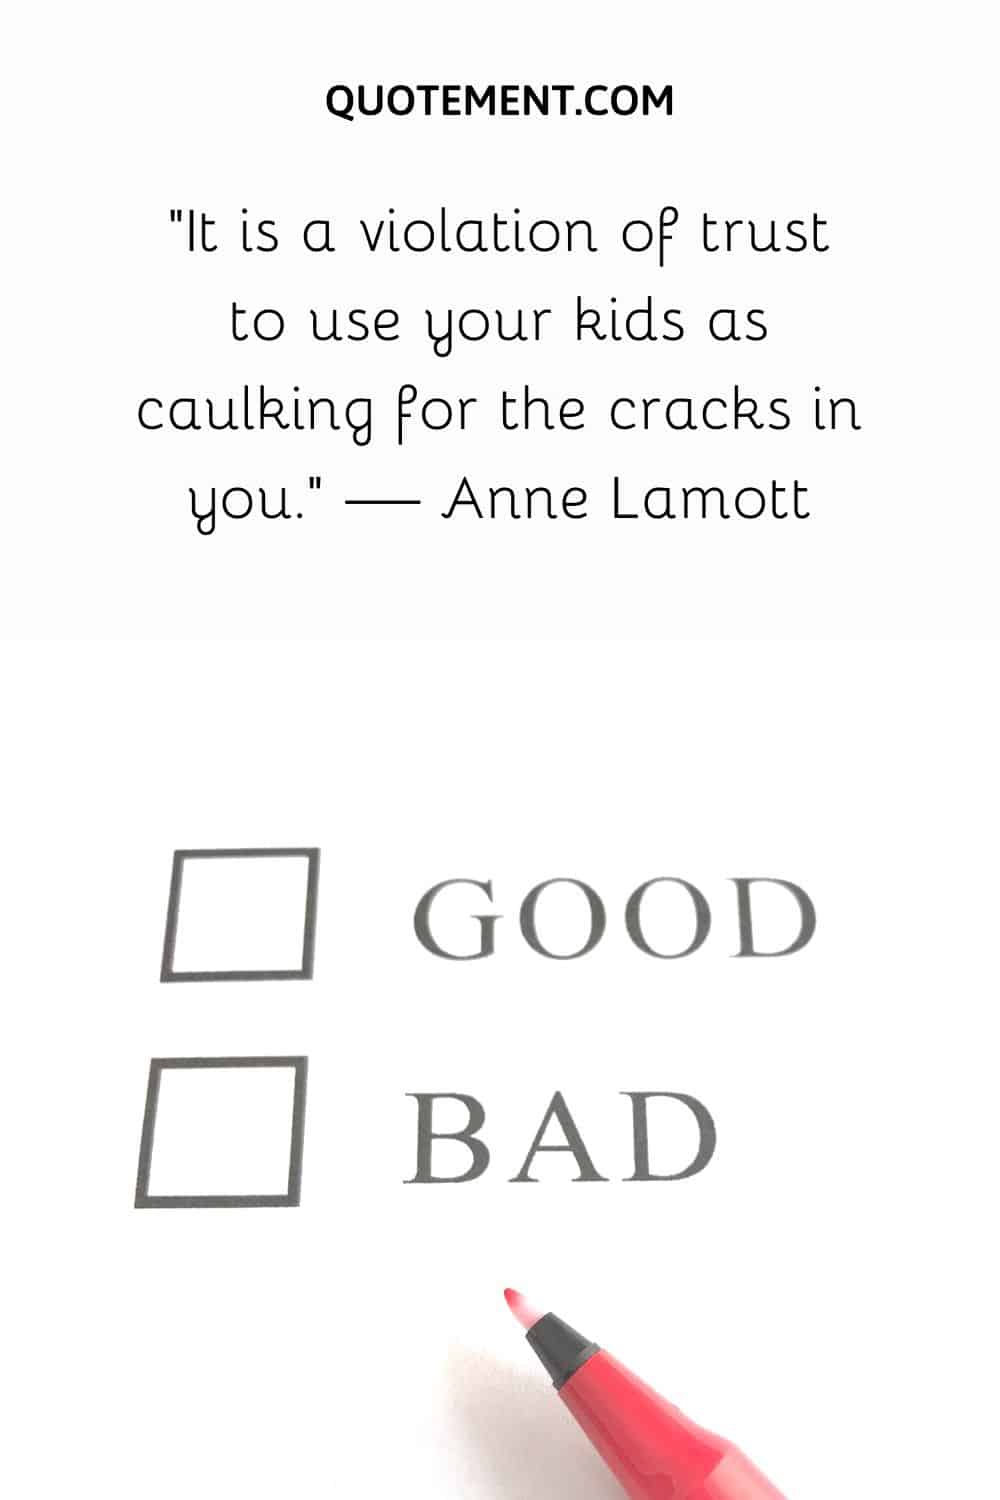 It is a violation of trust to use your kids as caulking for the cracks in you